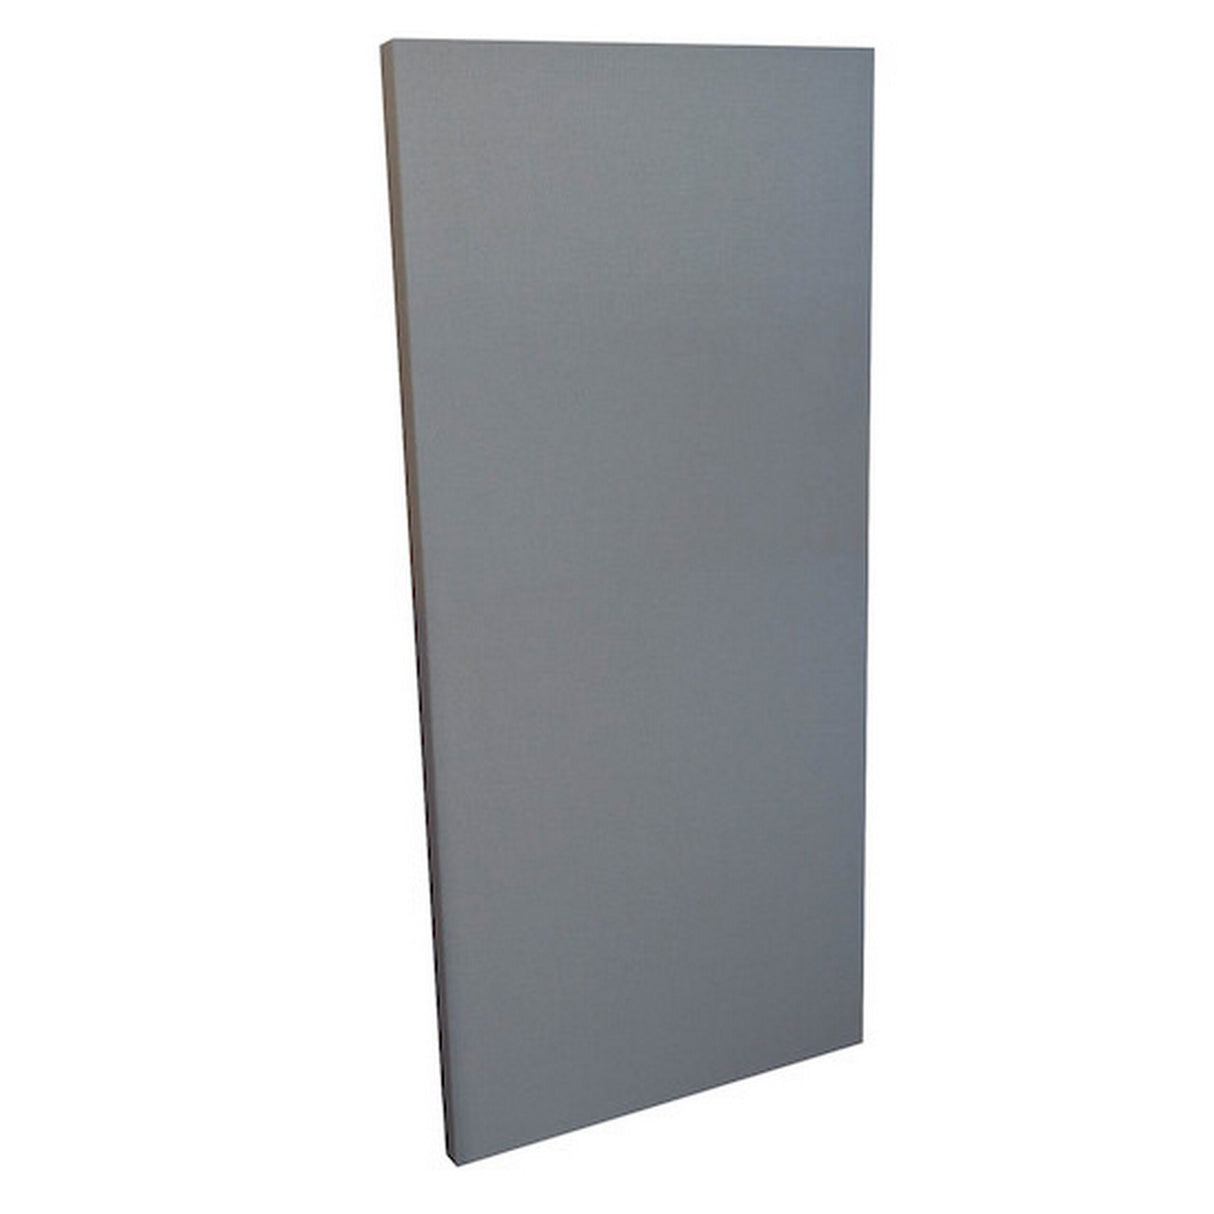 GeerFab ProZorber 2448 24 x 48 Inch By 1 Inch Panels, Pair, Coin